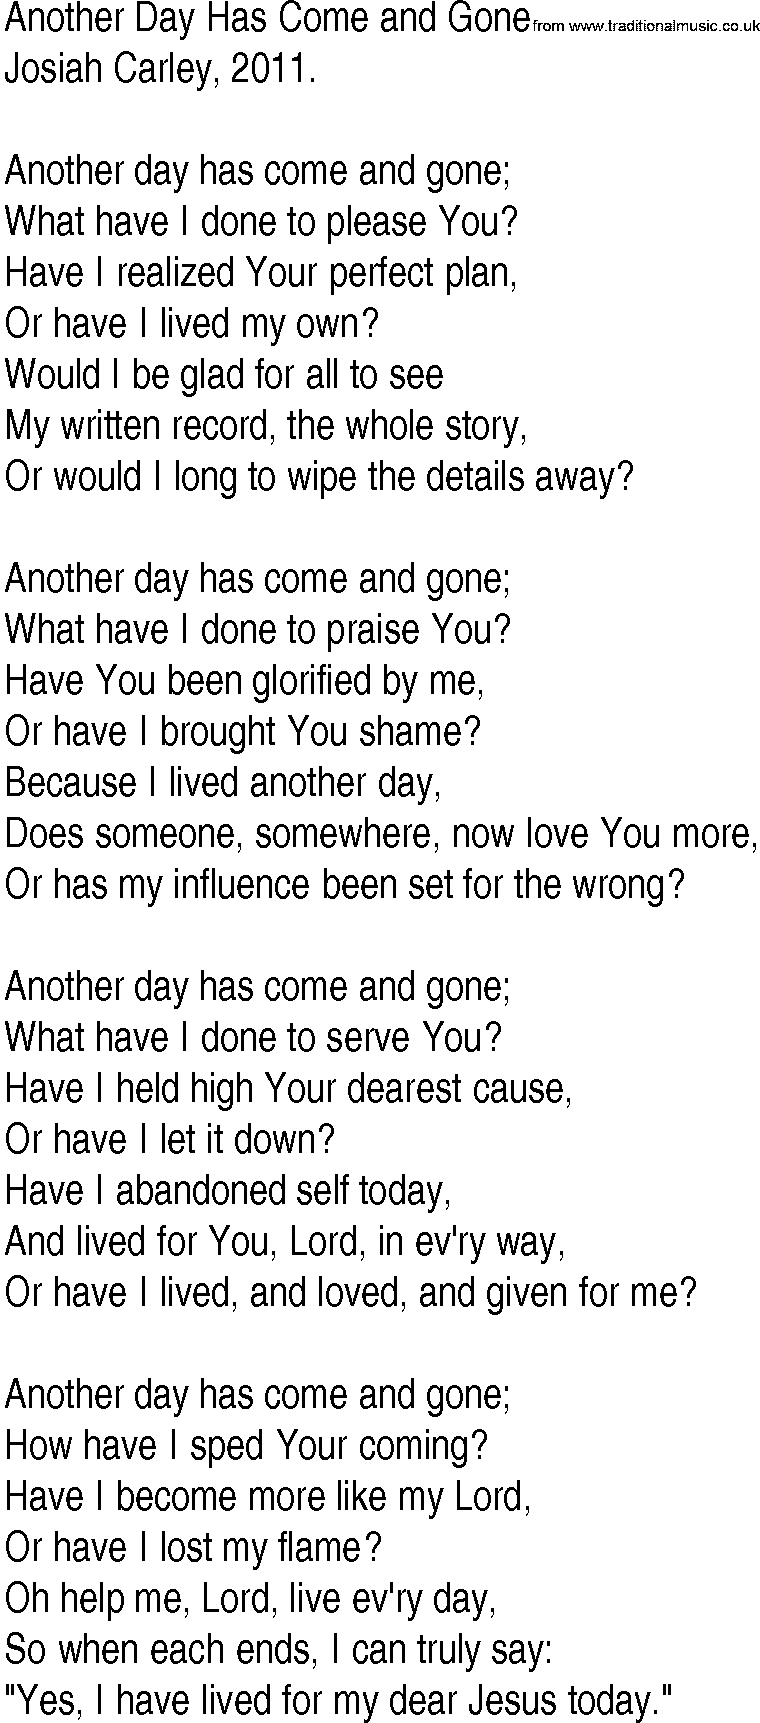 Hymn and Gospel Song: Another Day Has Come and Gone by Josiah Carley lyrics